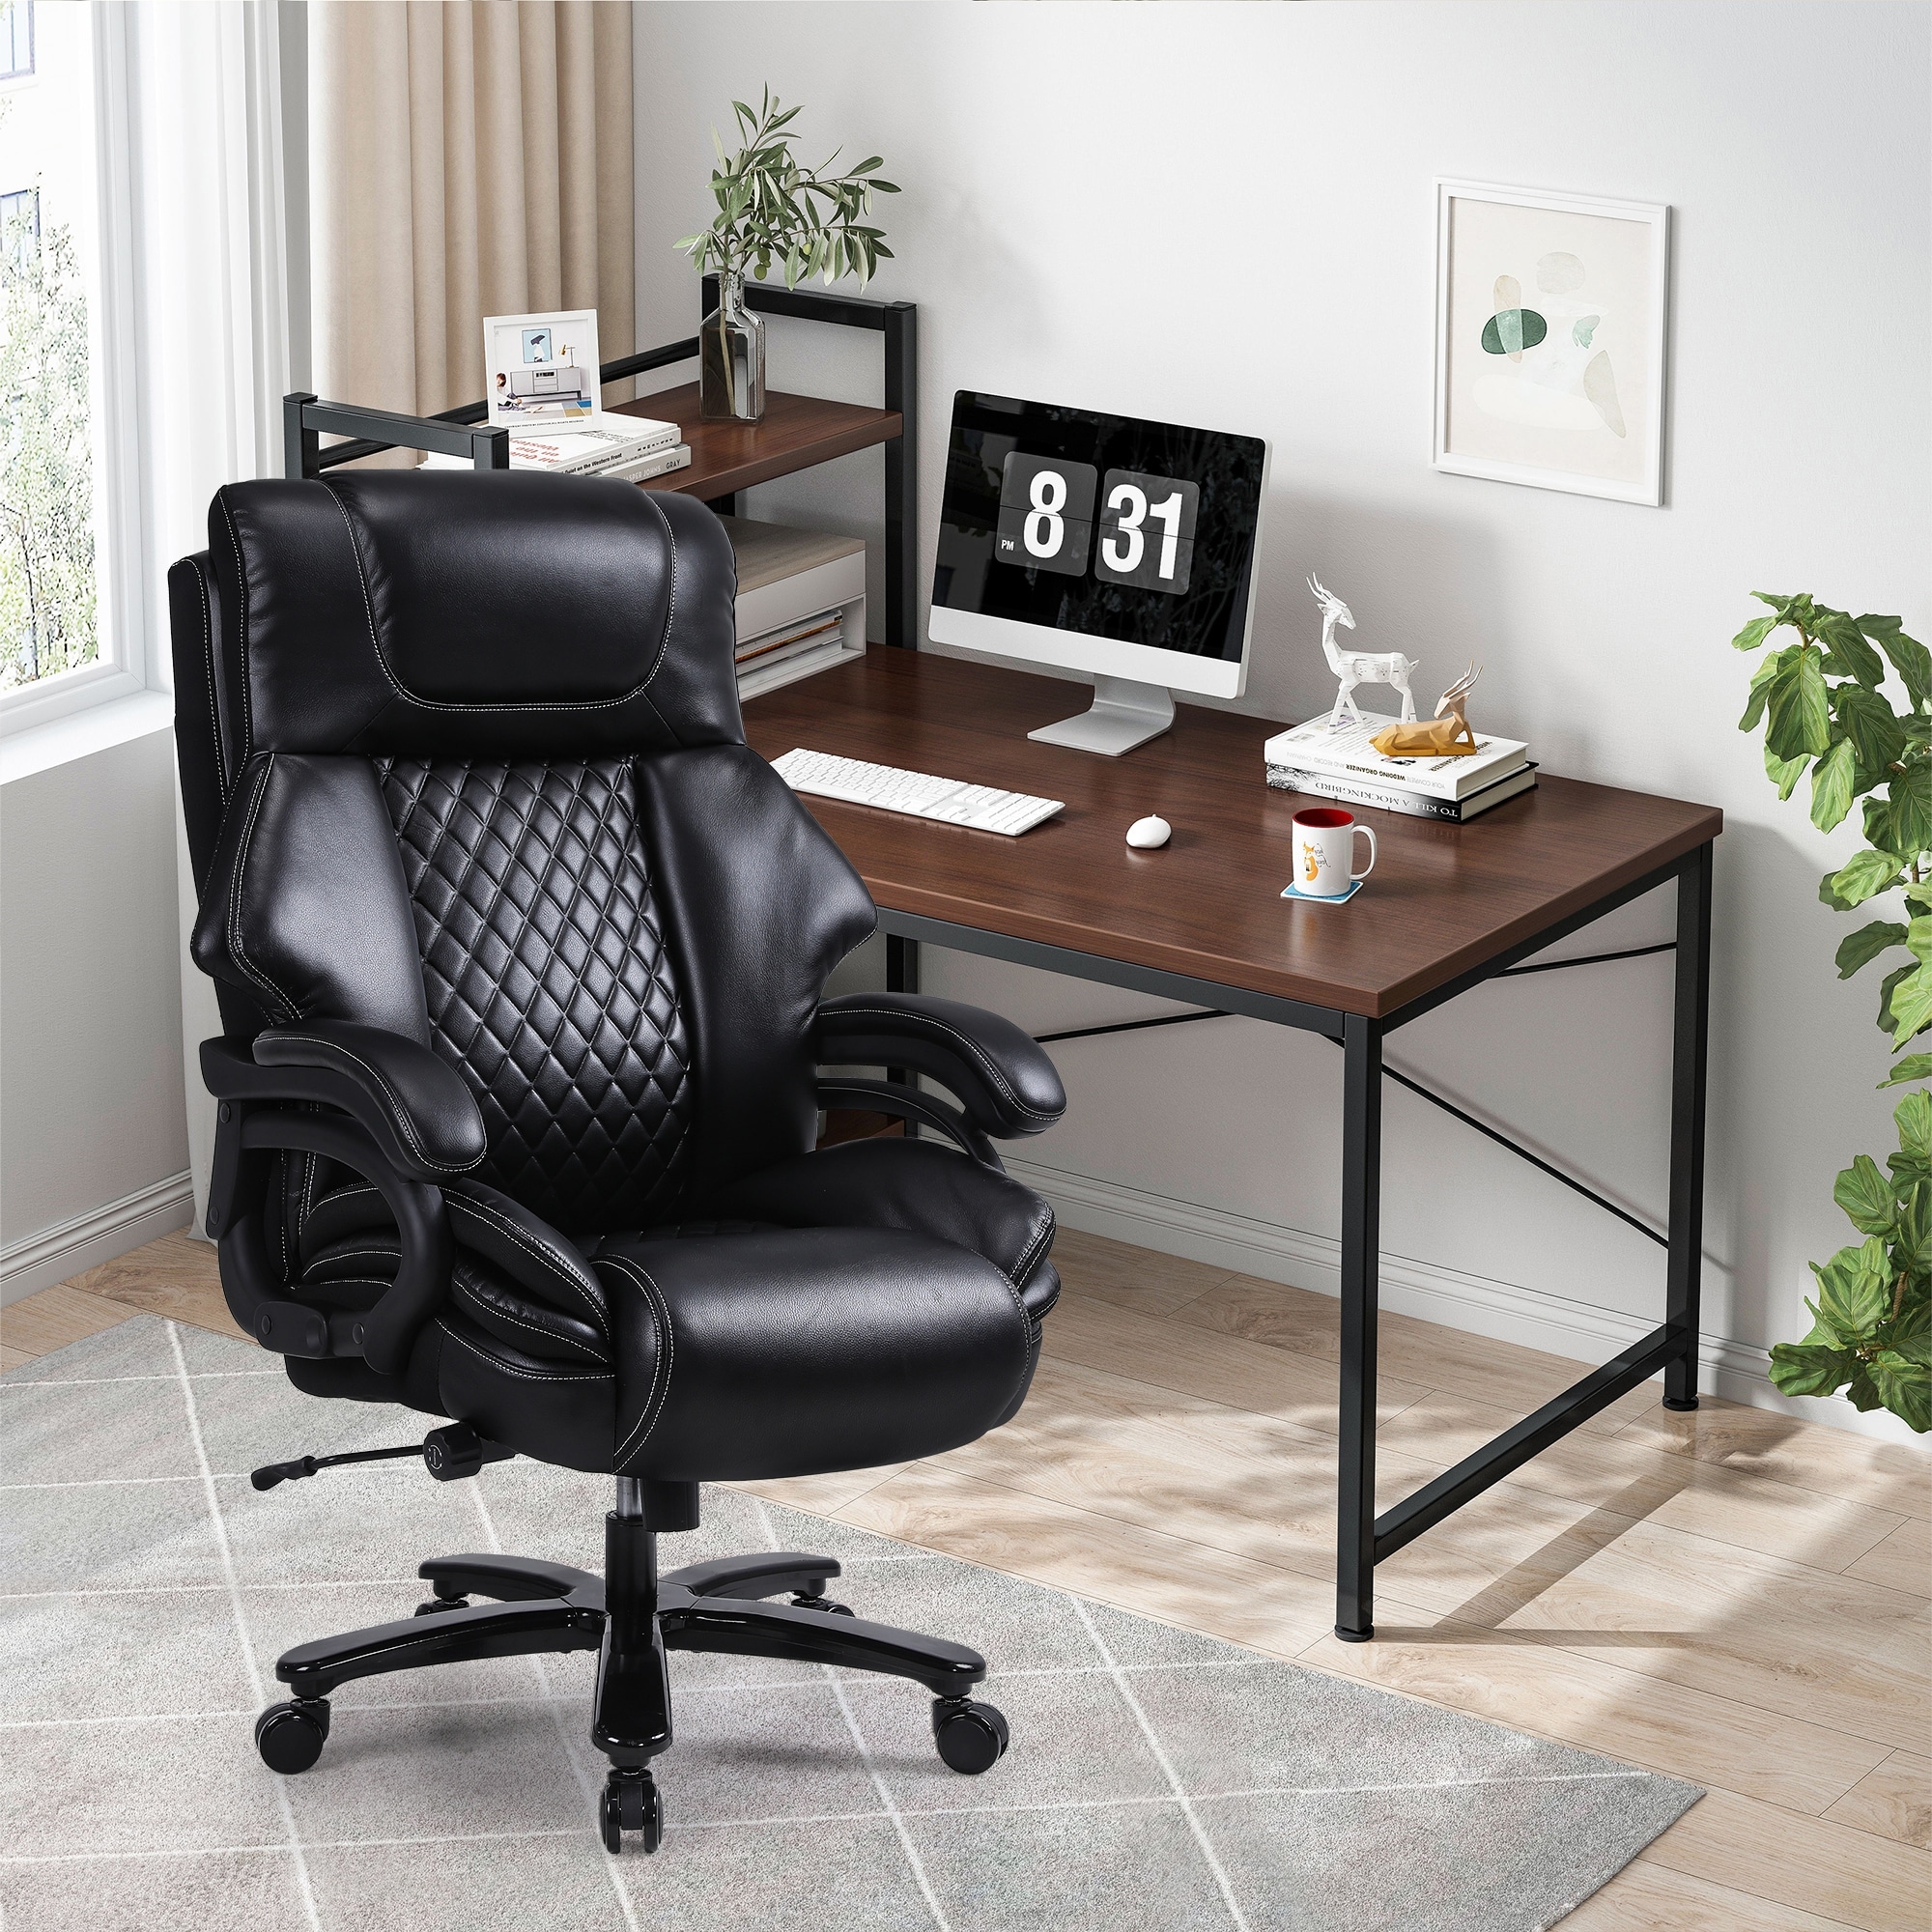 https://ak1.ostkcdn.com/images/products/is/images/direct/85fe972c10ac607d2818ac2d43035691ee63f7ef/Office-Chair.Heavy-and-tall-adjustable-executive-Big-and-Tall-Office-Chair.jpg